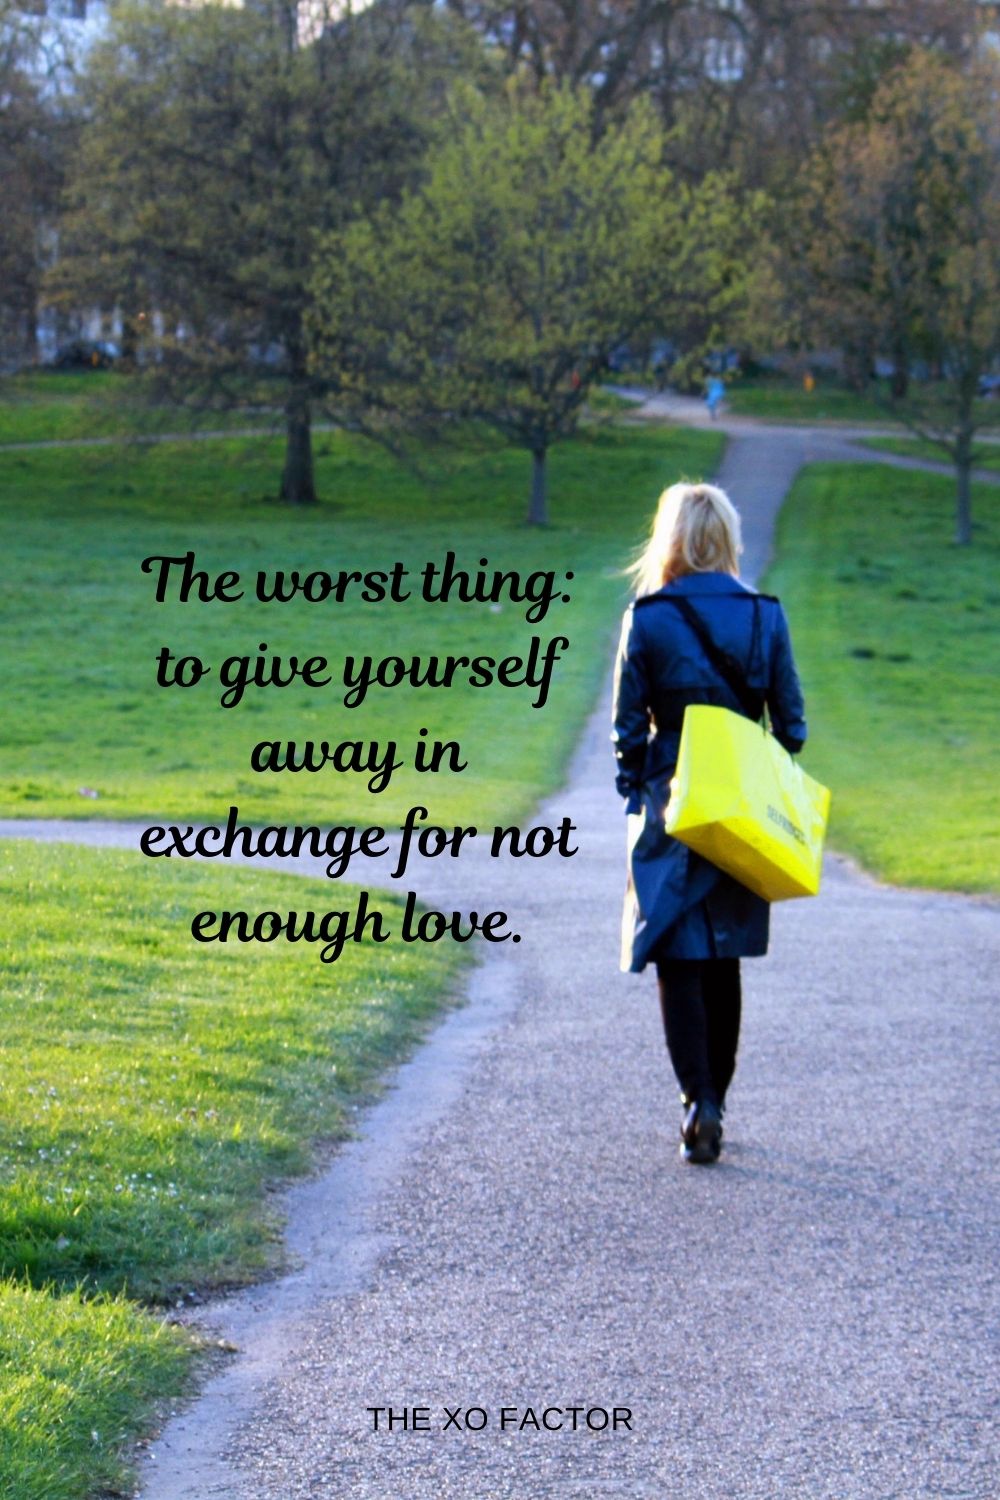 The worst thing: to give yourself away in exchange for not enough love.